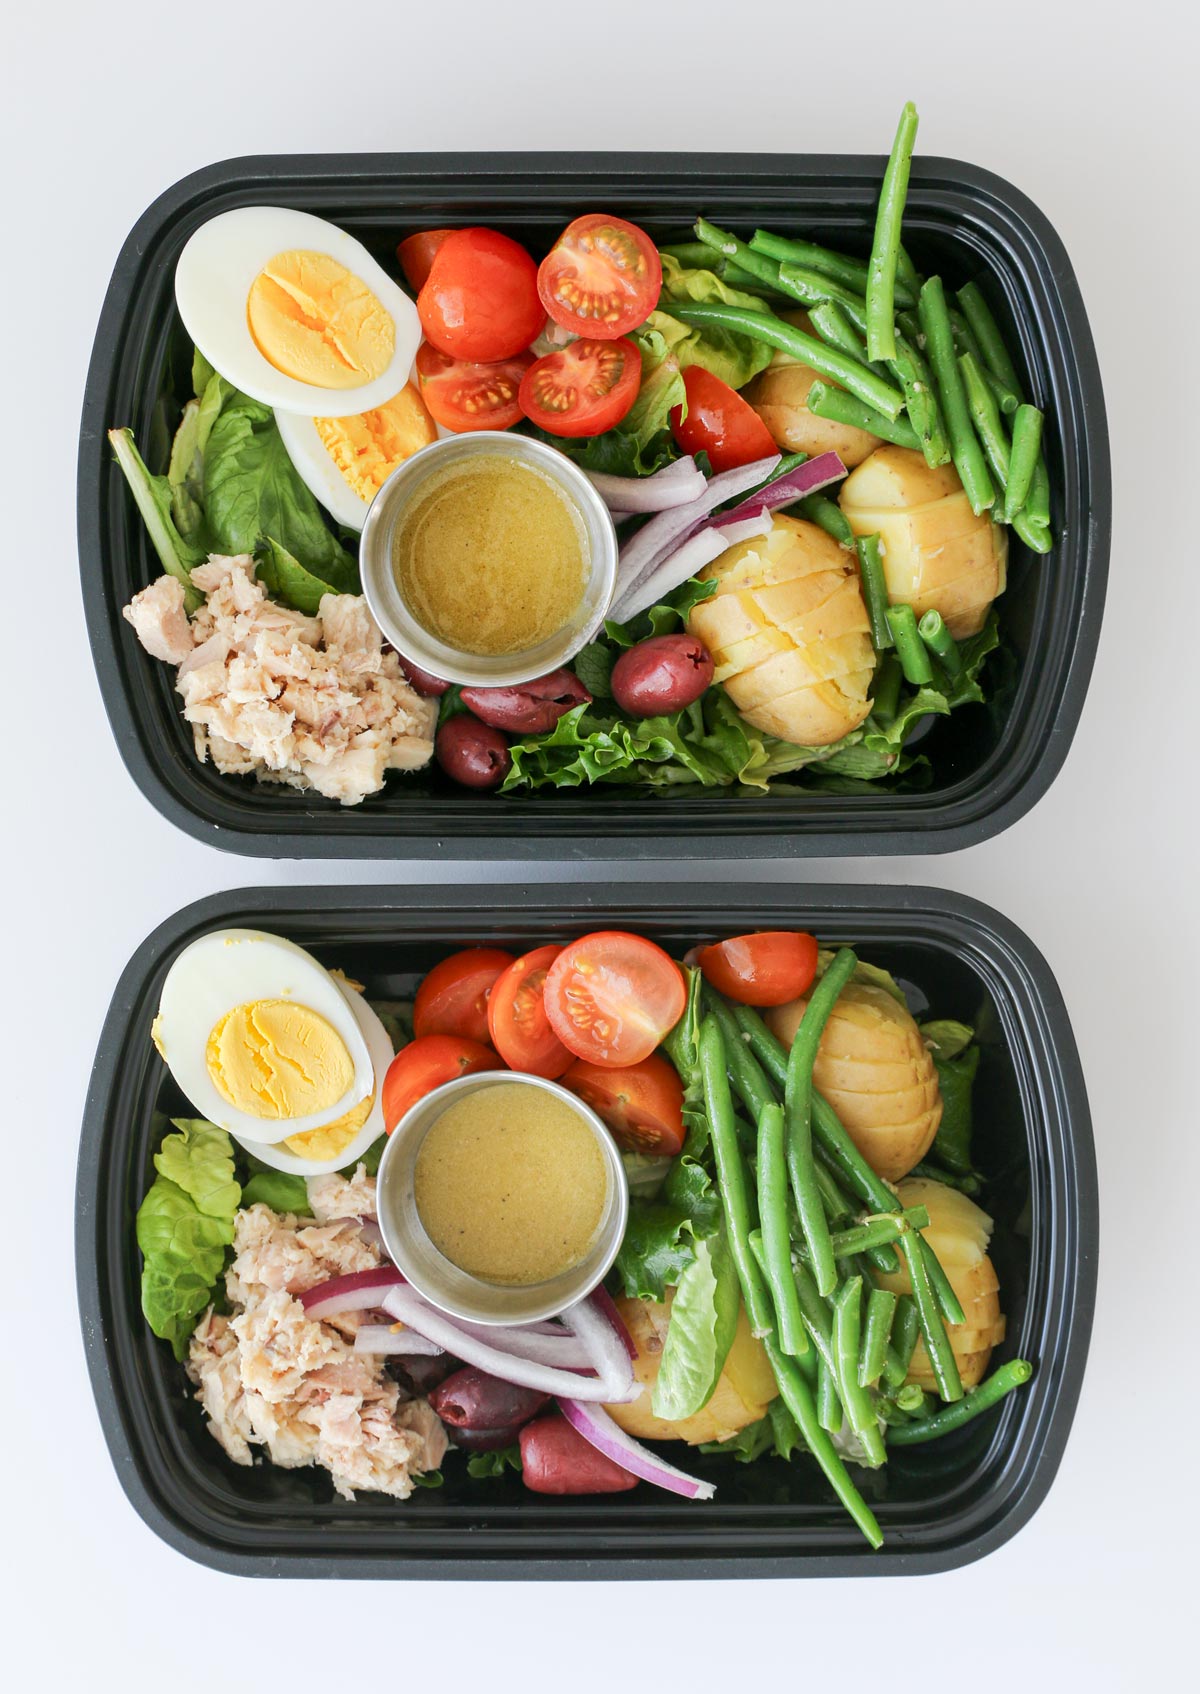 salad Nicoise made as a meal prep in black boxes.